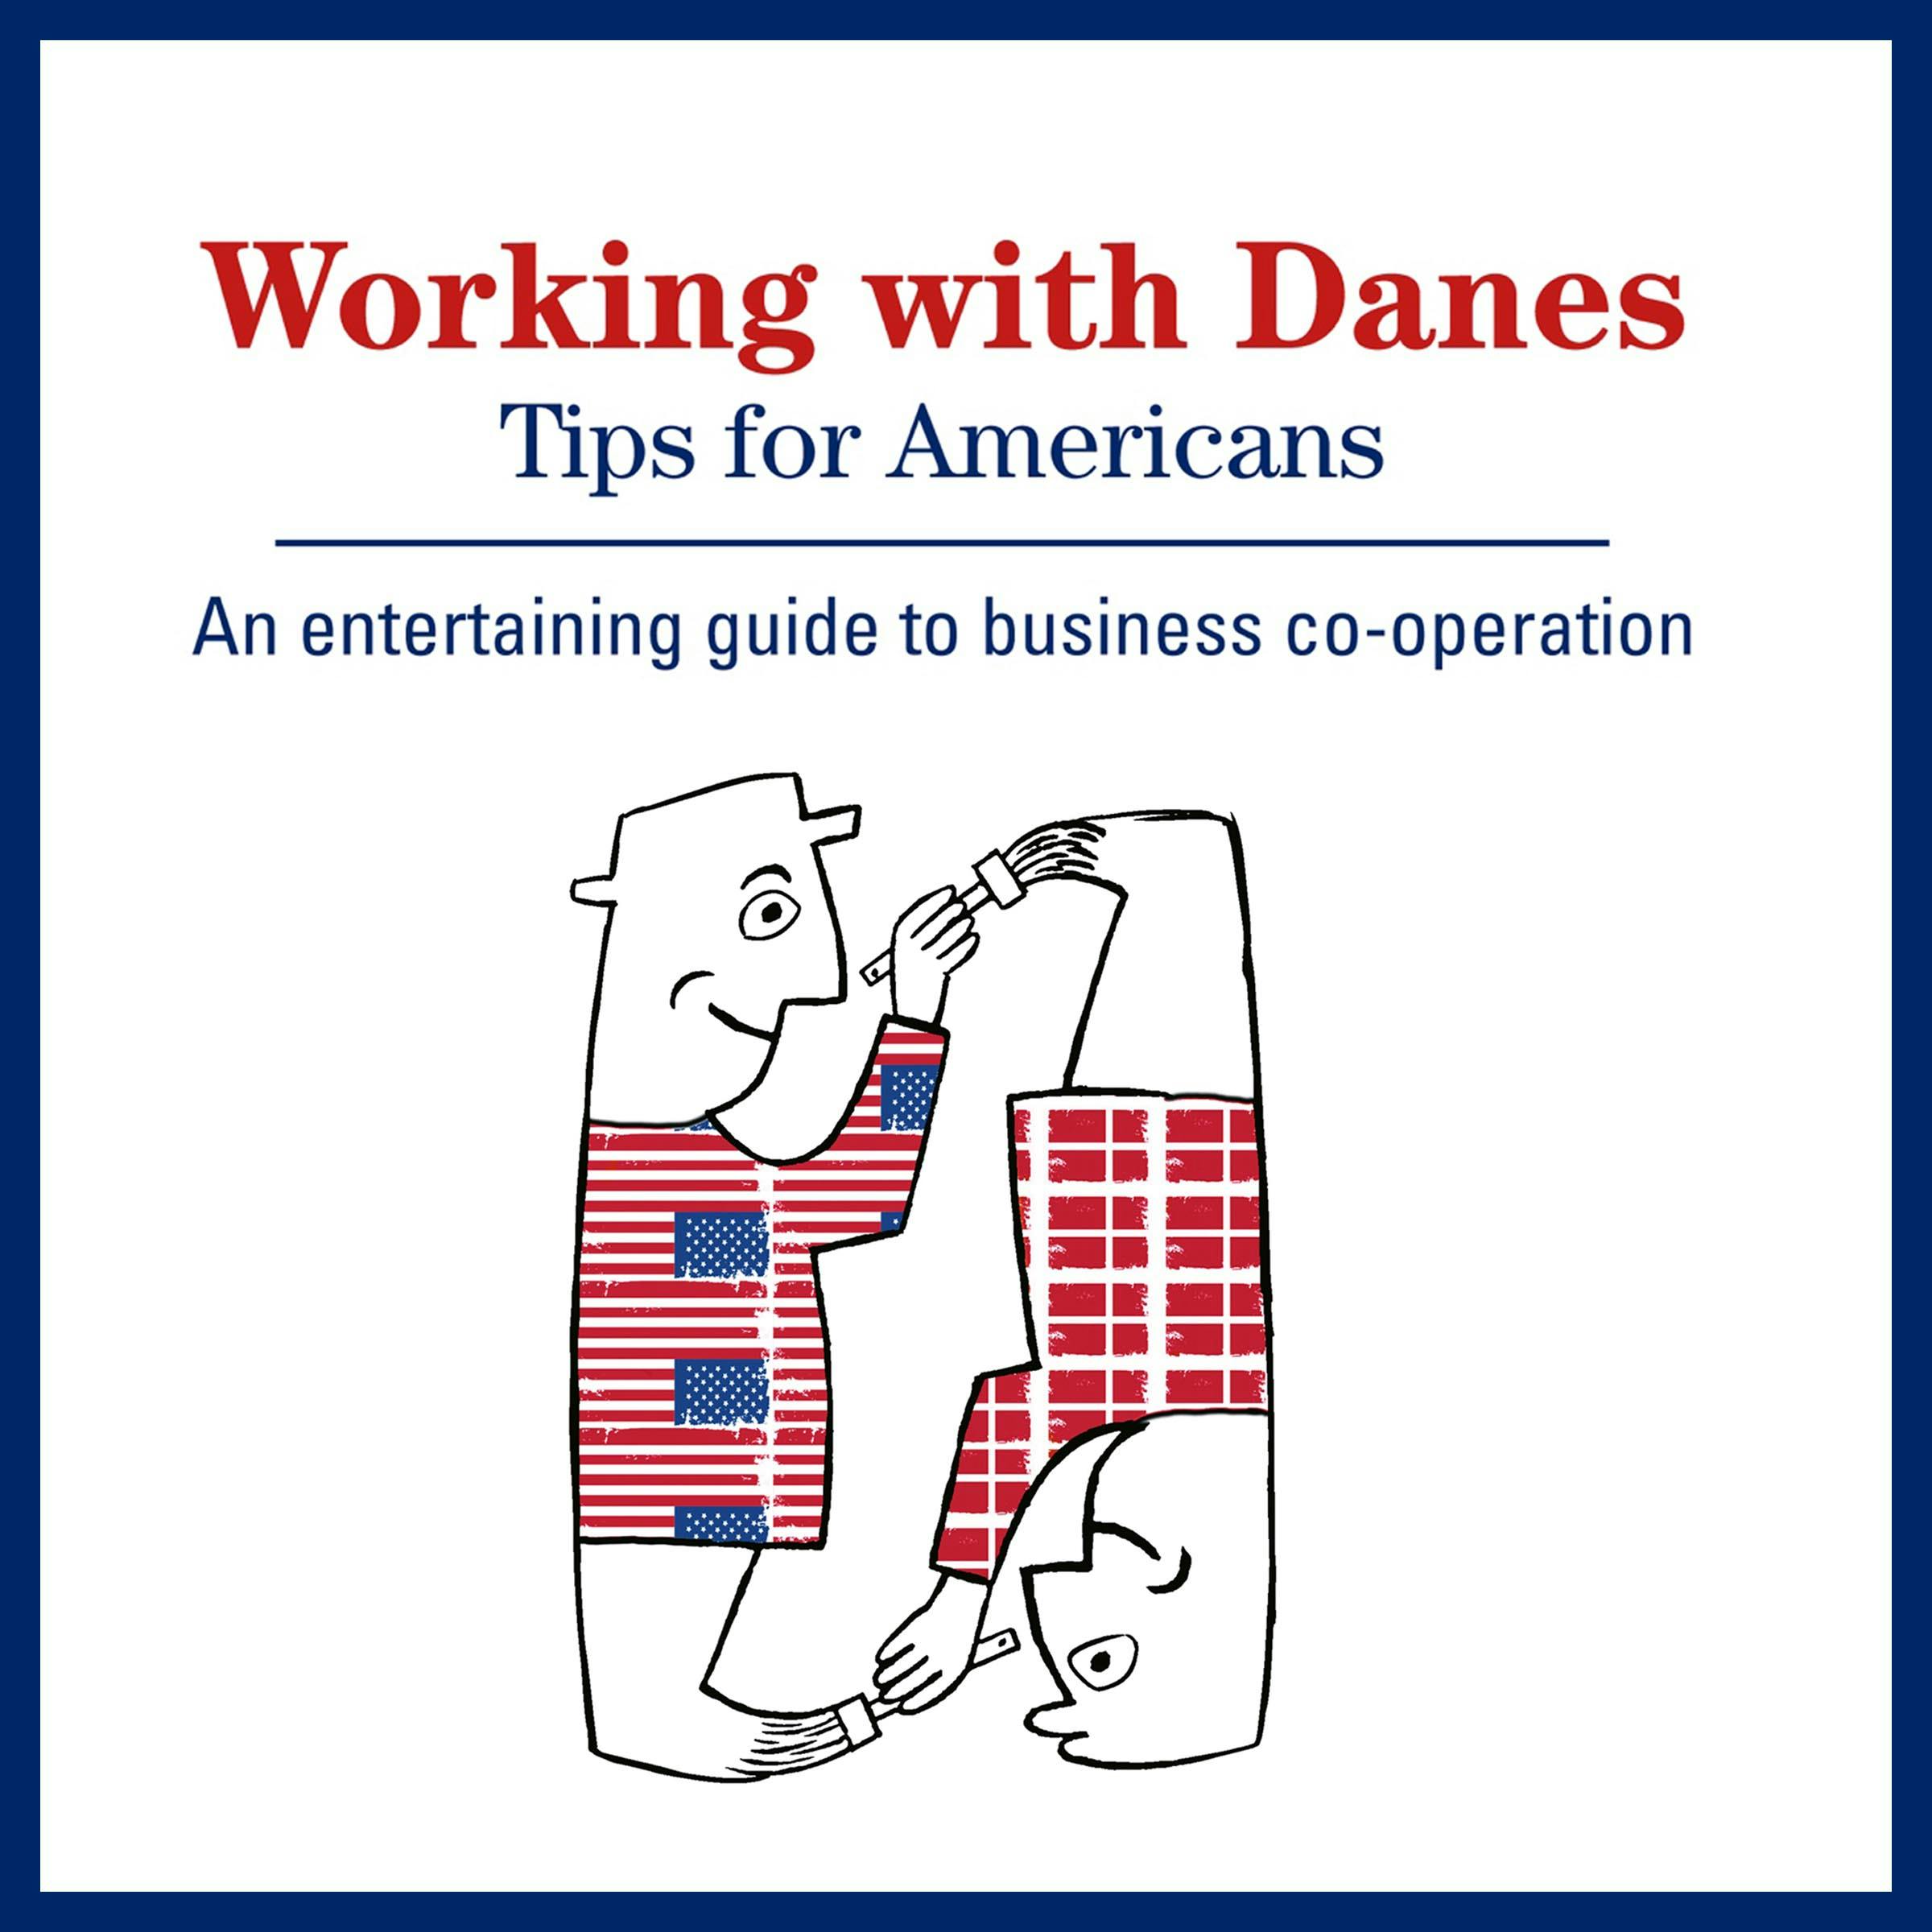 Working With Danes: Tips for Americans: An enjoyable look at doing business in Denmark - Kay Xander Mellish